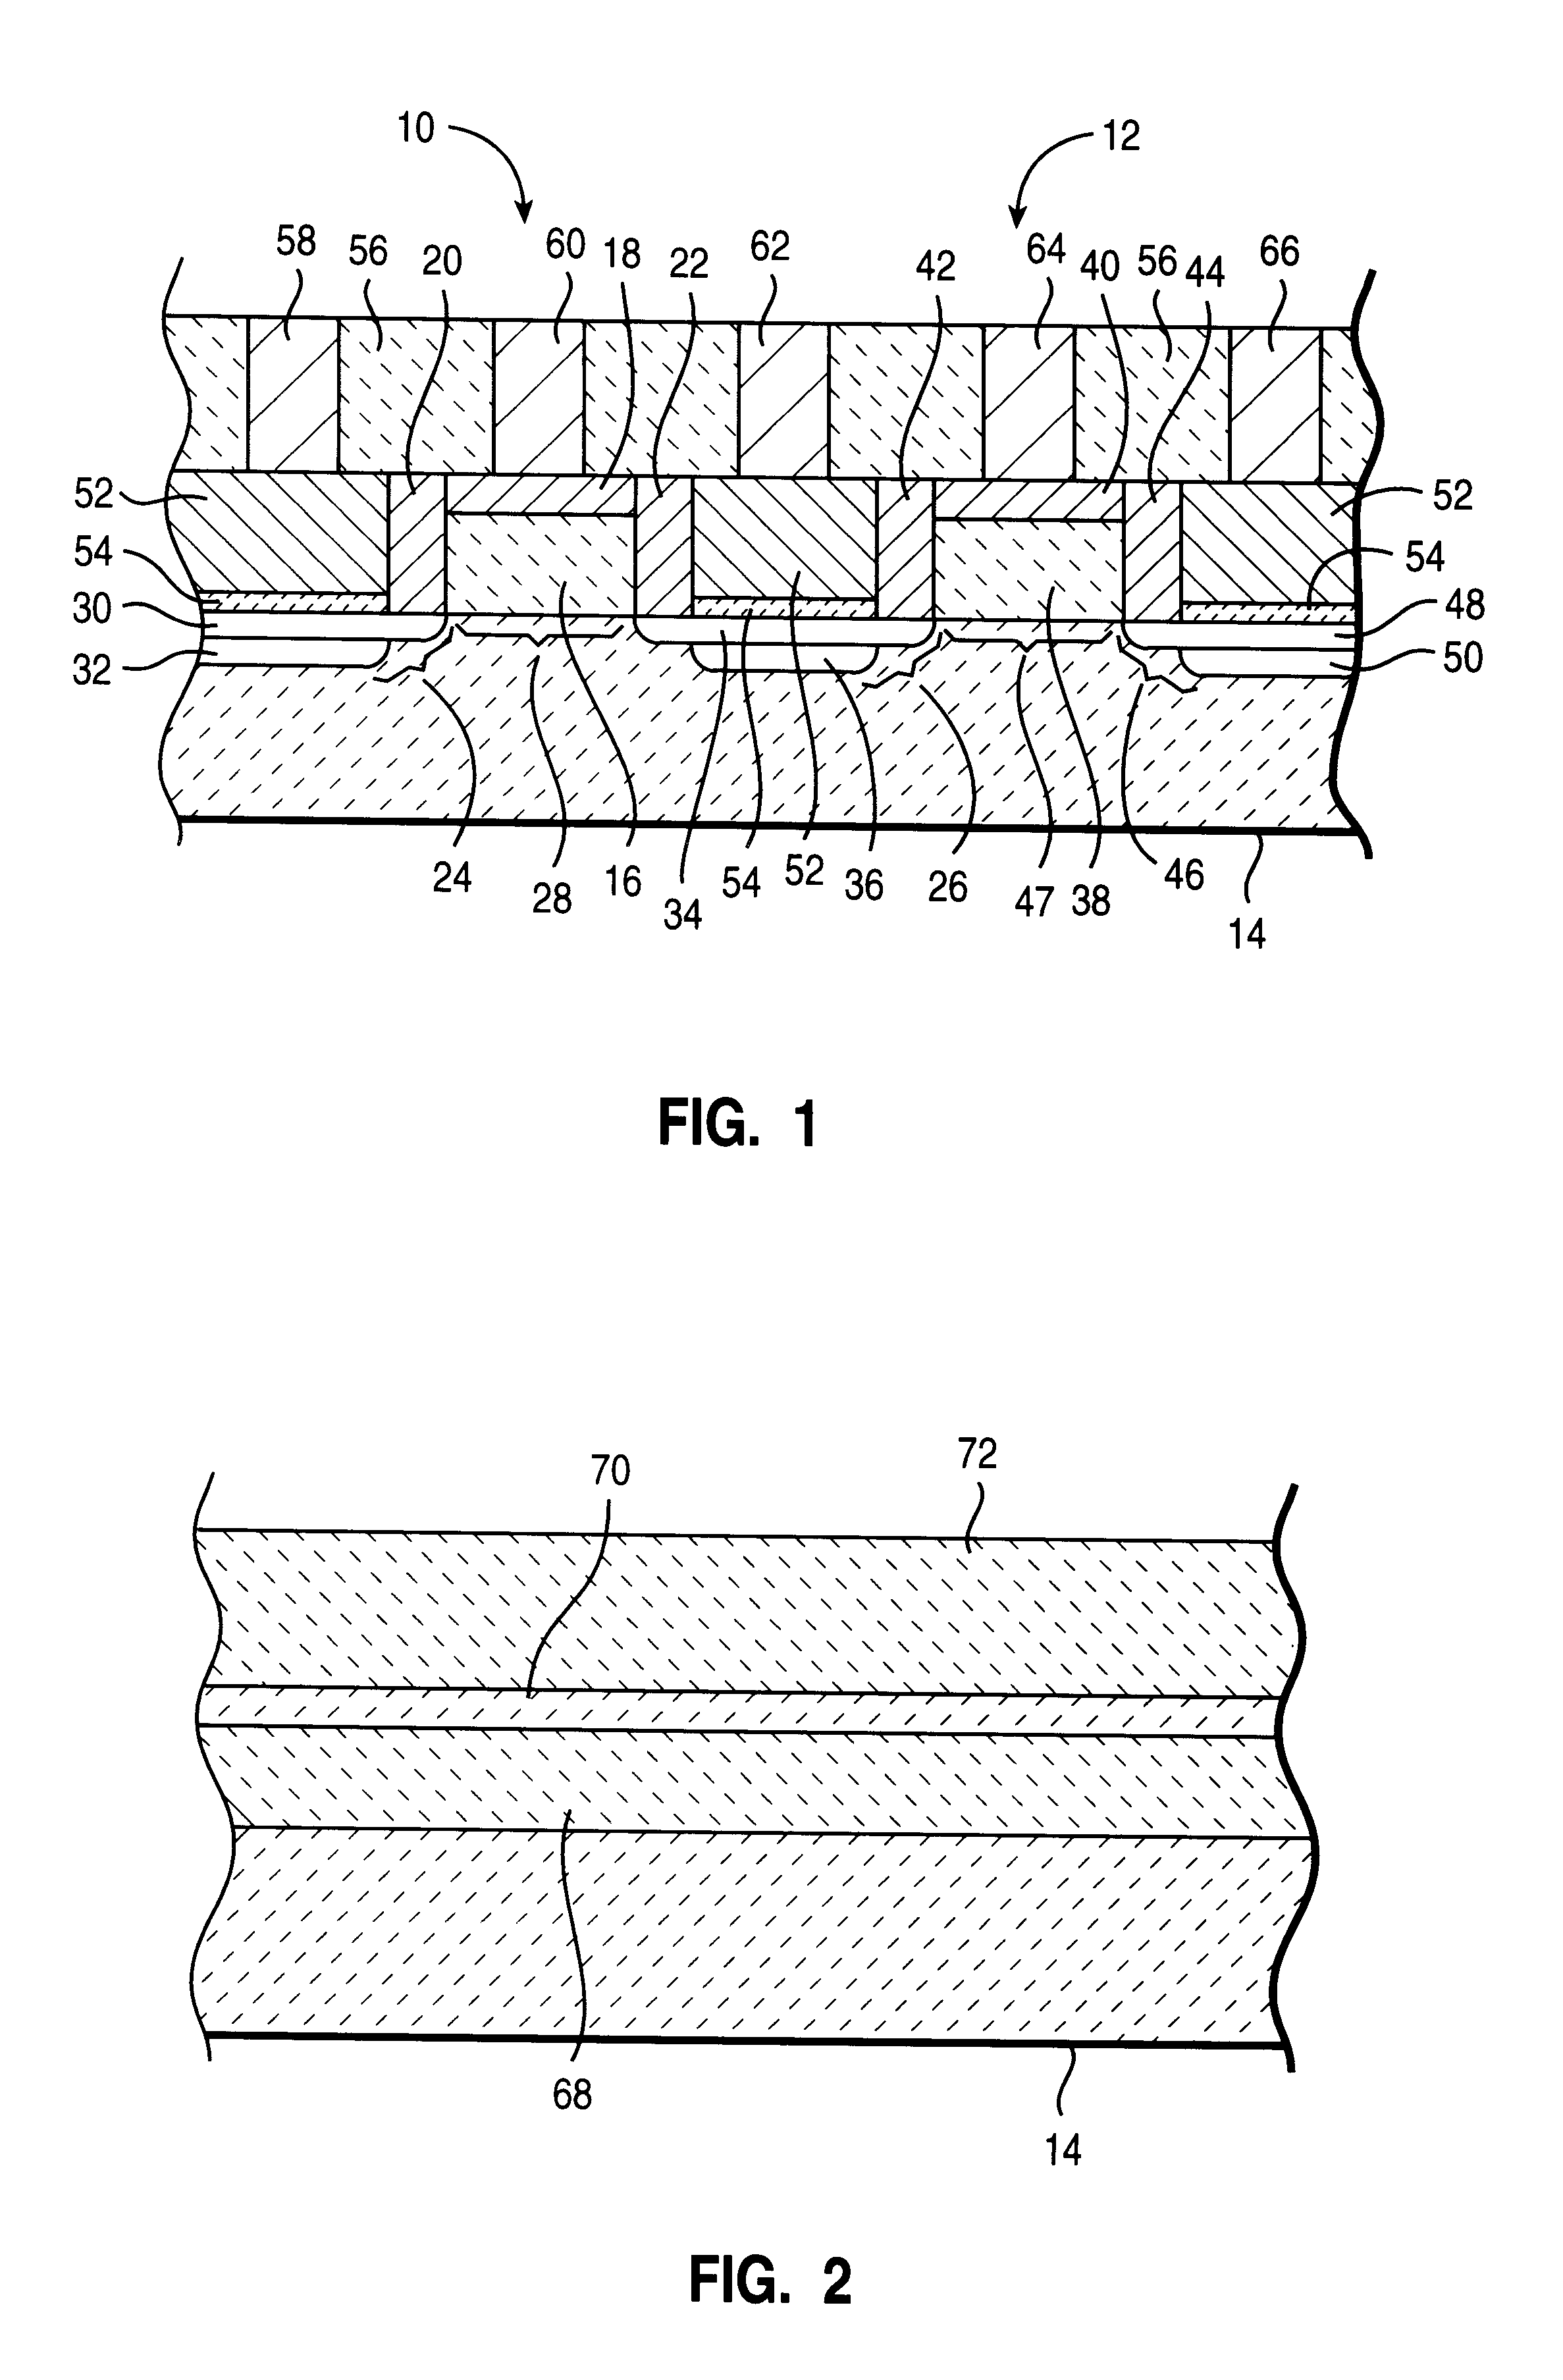 Method of making high performance MOSFET with polished gate and source/drain feature